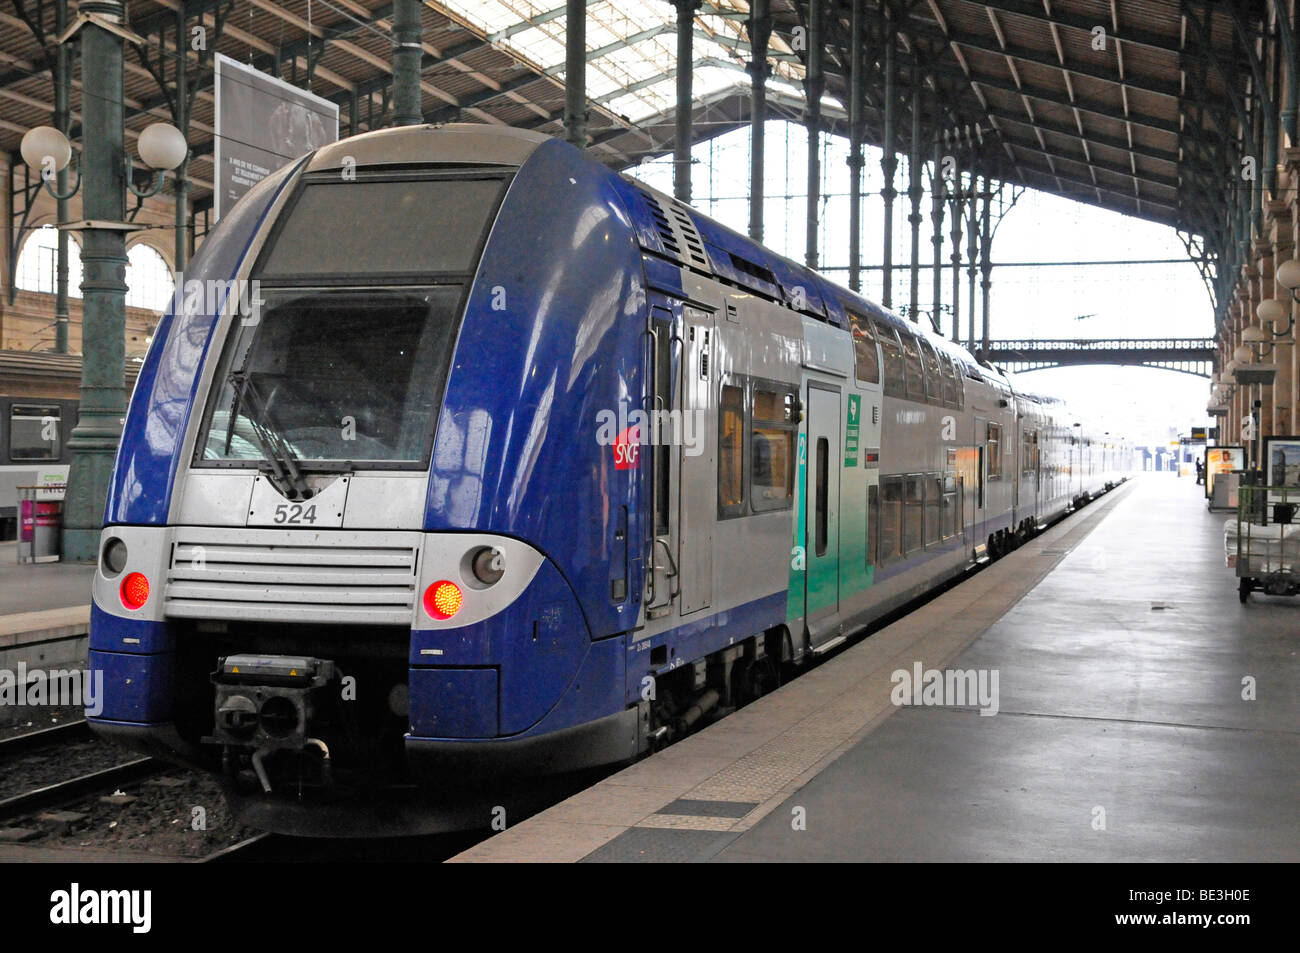 Local train, Gare du Nord, North station, Paris, France, Europe Stock Photo